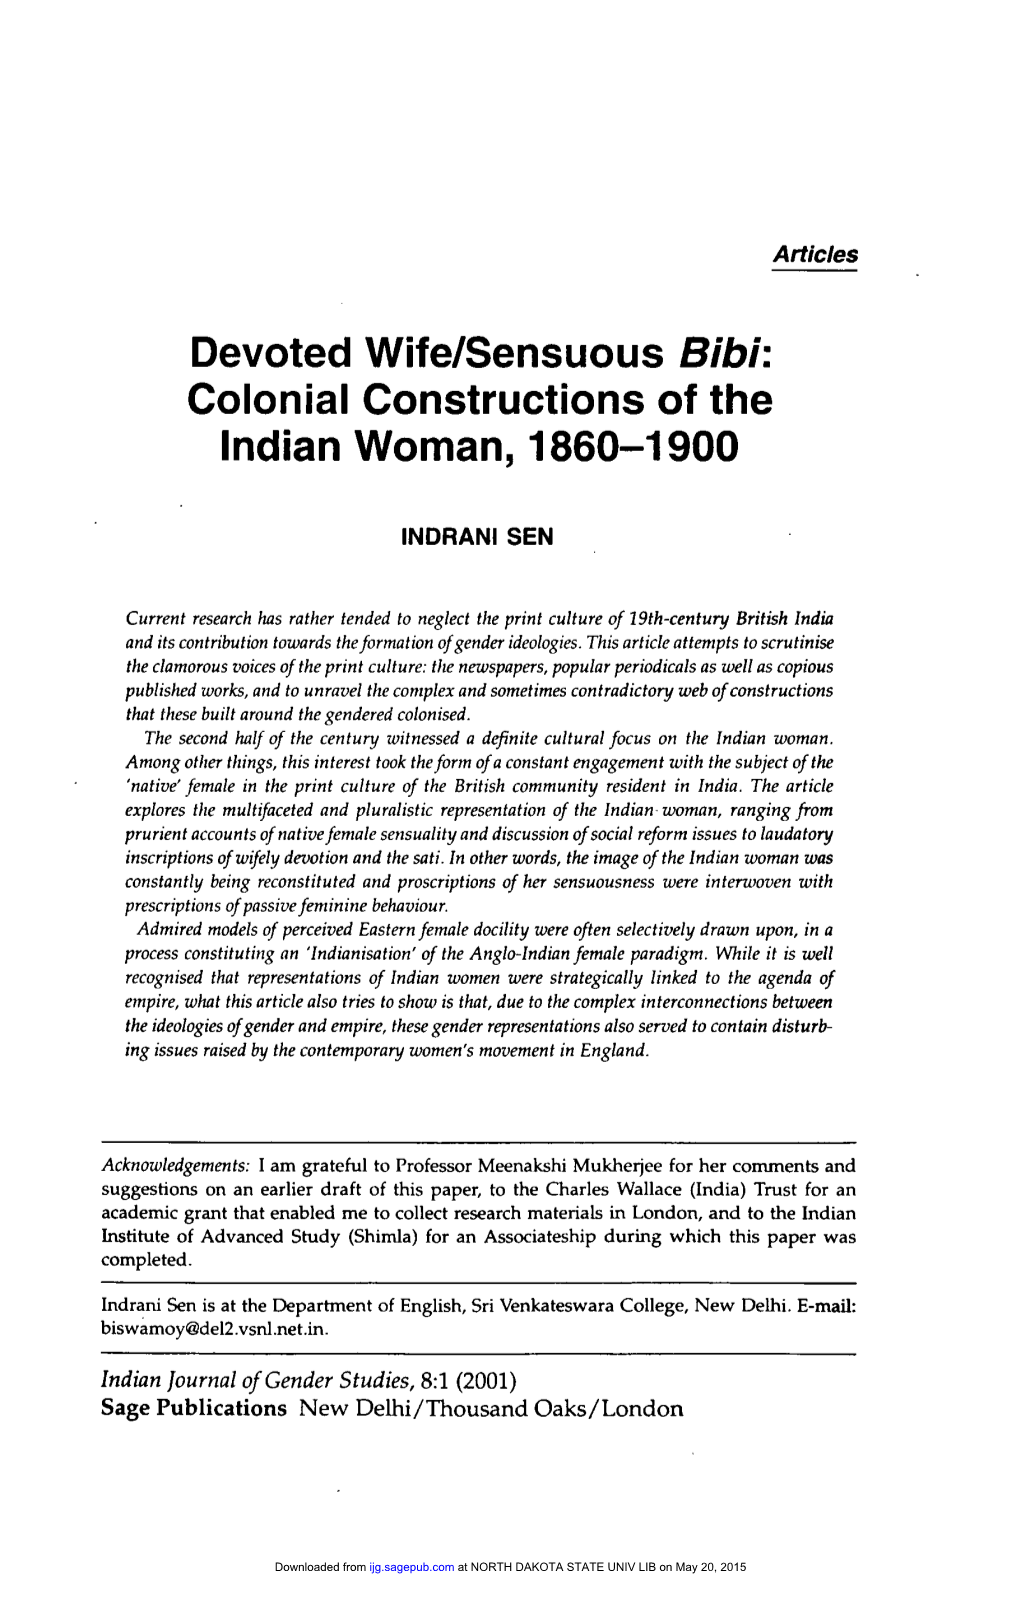 Devoted Wife/Sensuous Bibi: Colonial Constructions of the Indian Woman, 1860-1900